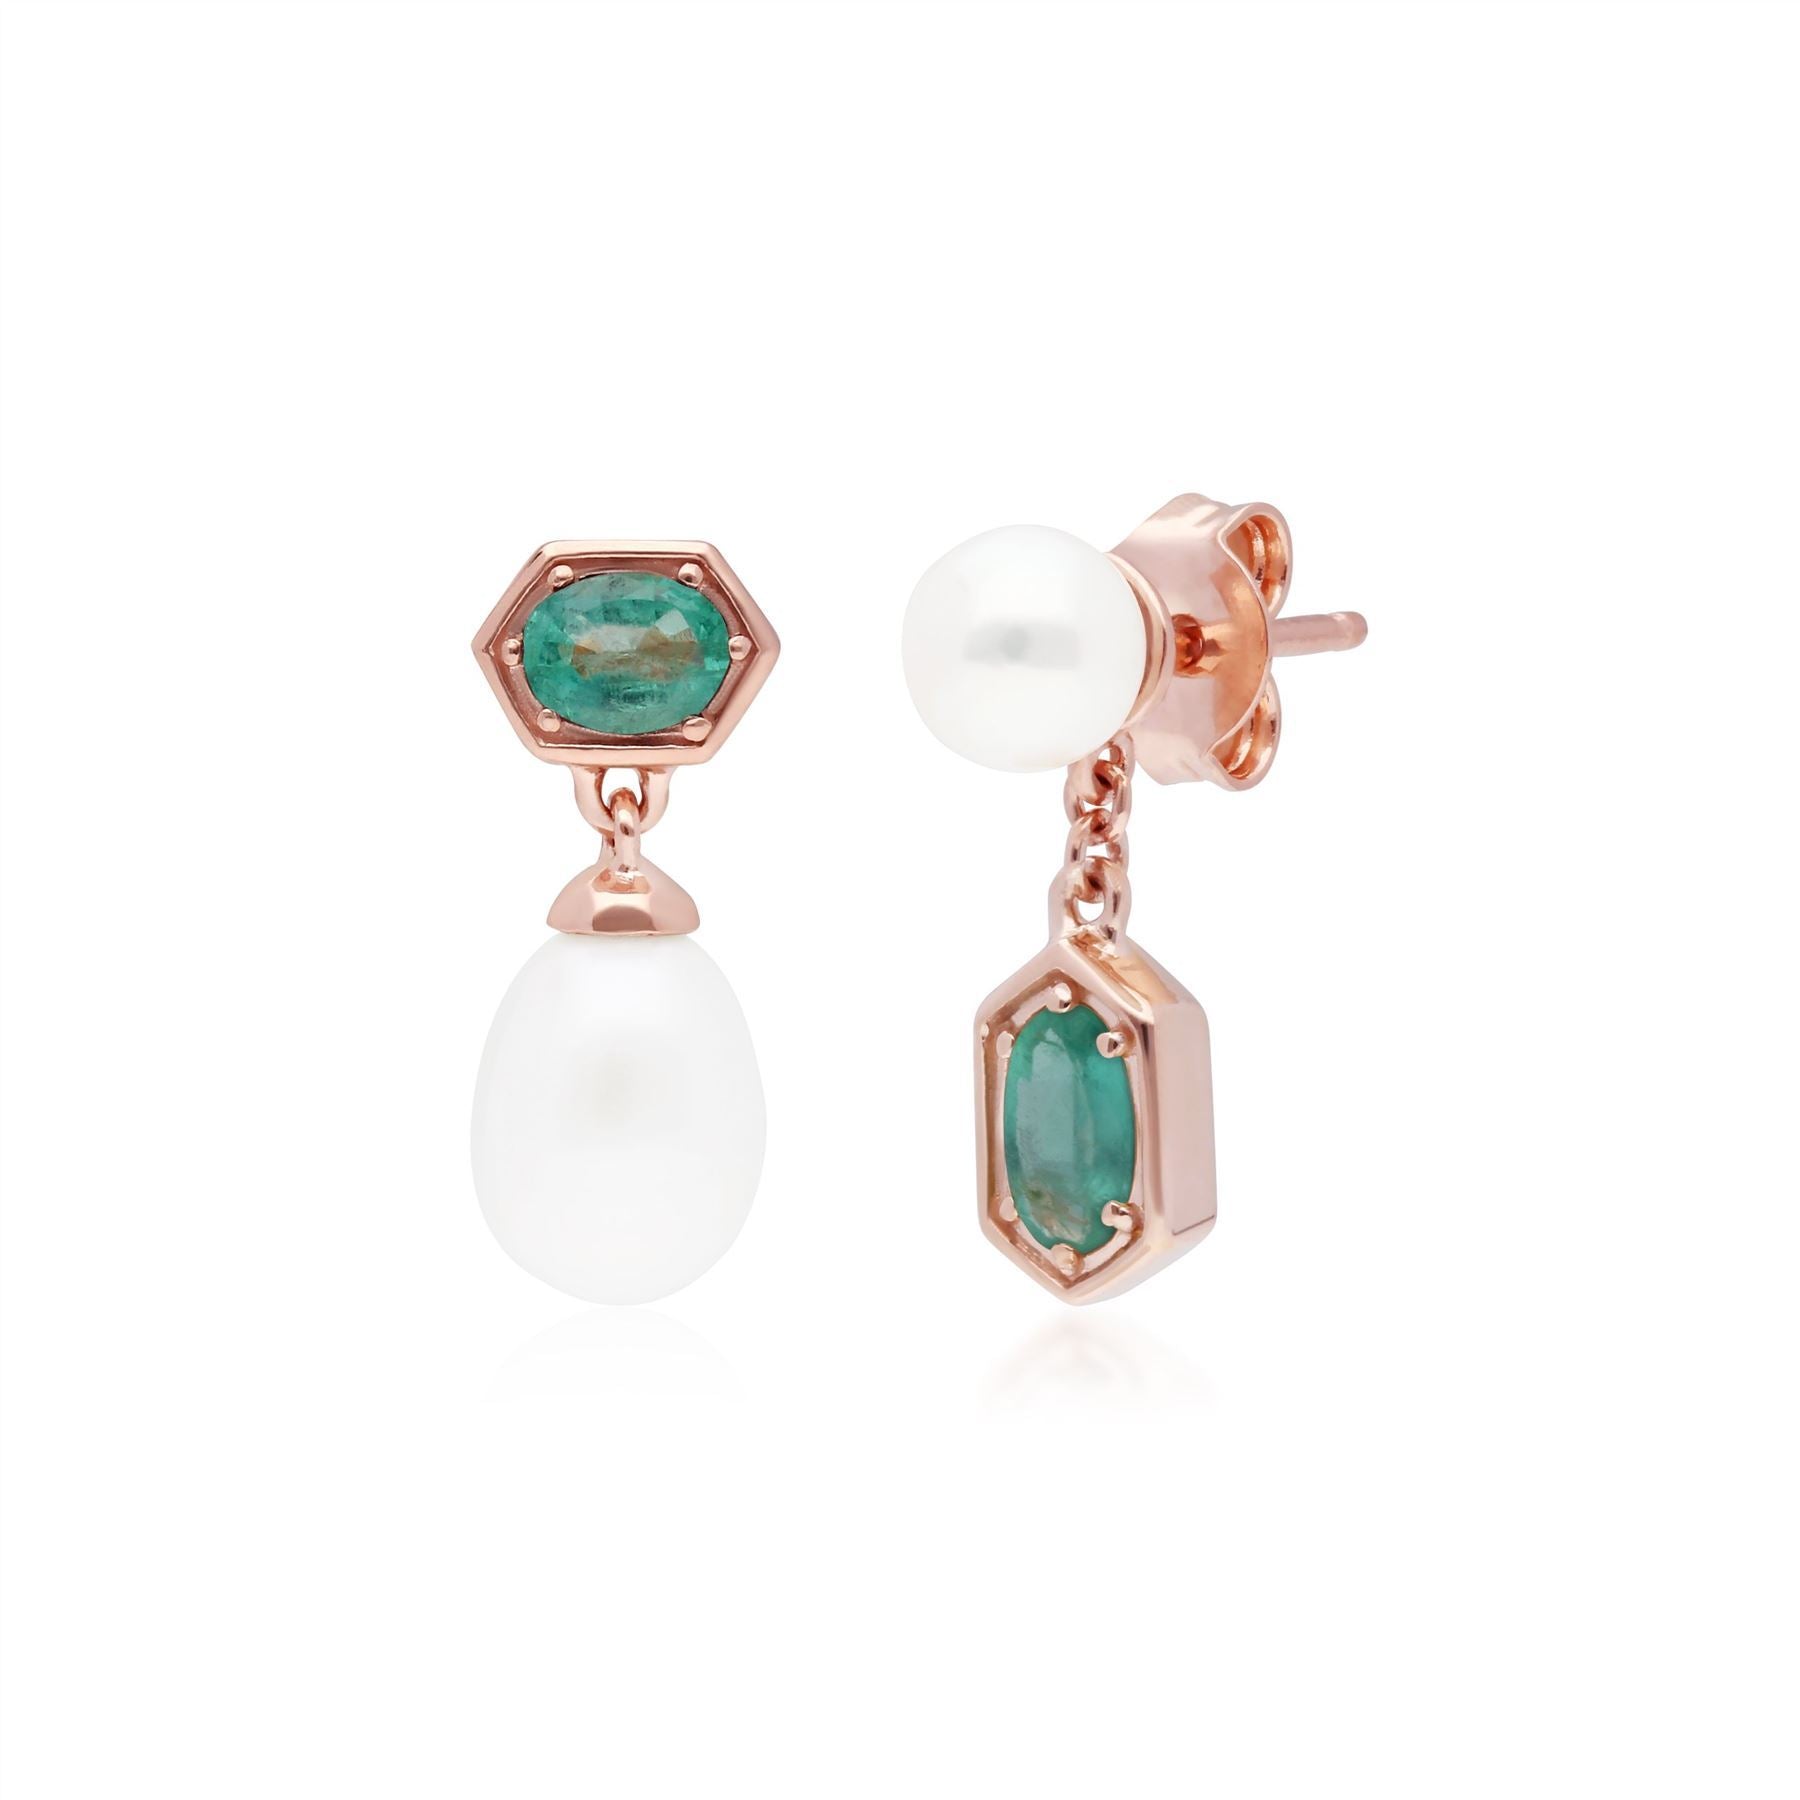 Modern Pearl & Emerald Mismatched Drop Earrings in Rose Gold Plated Sterling Silver